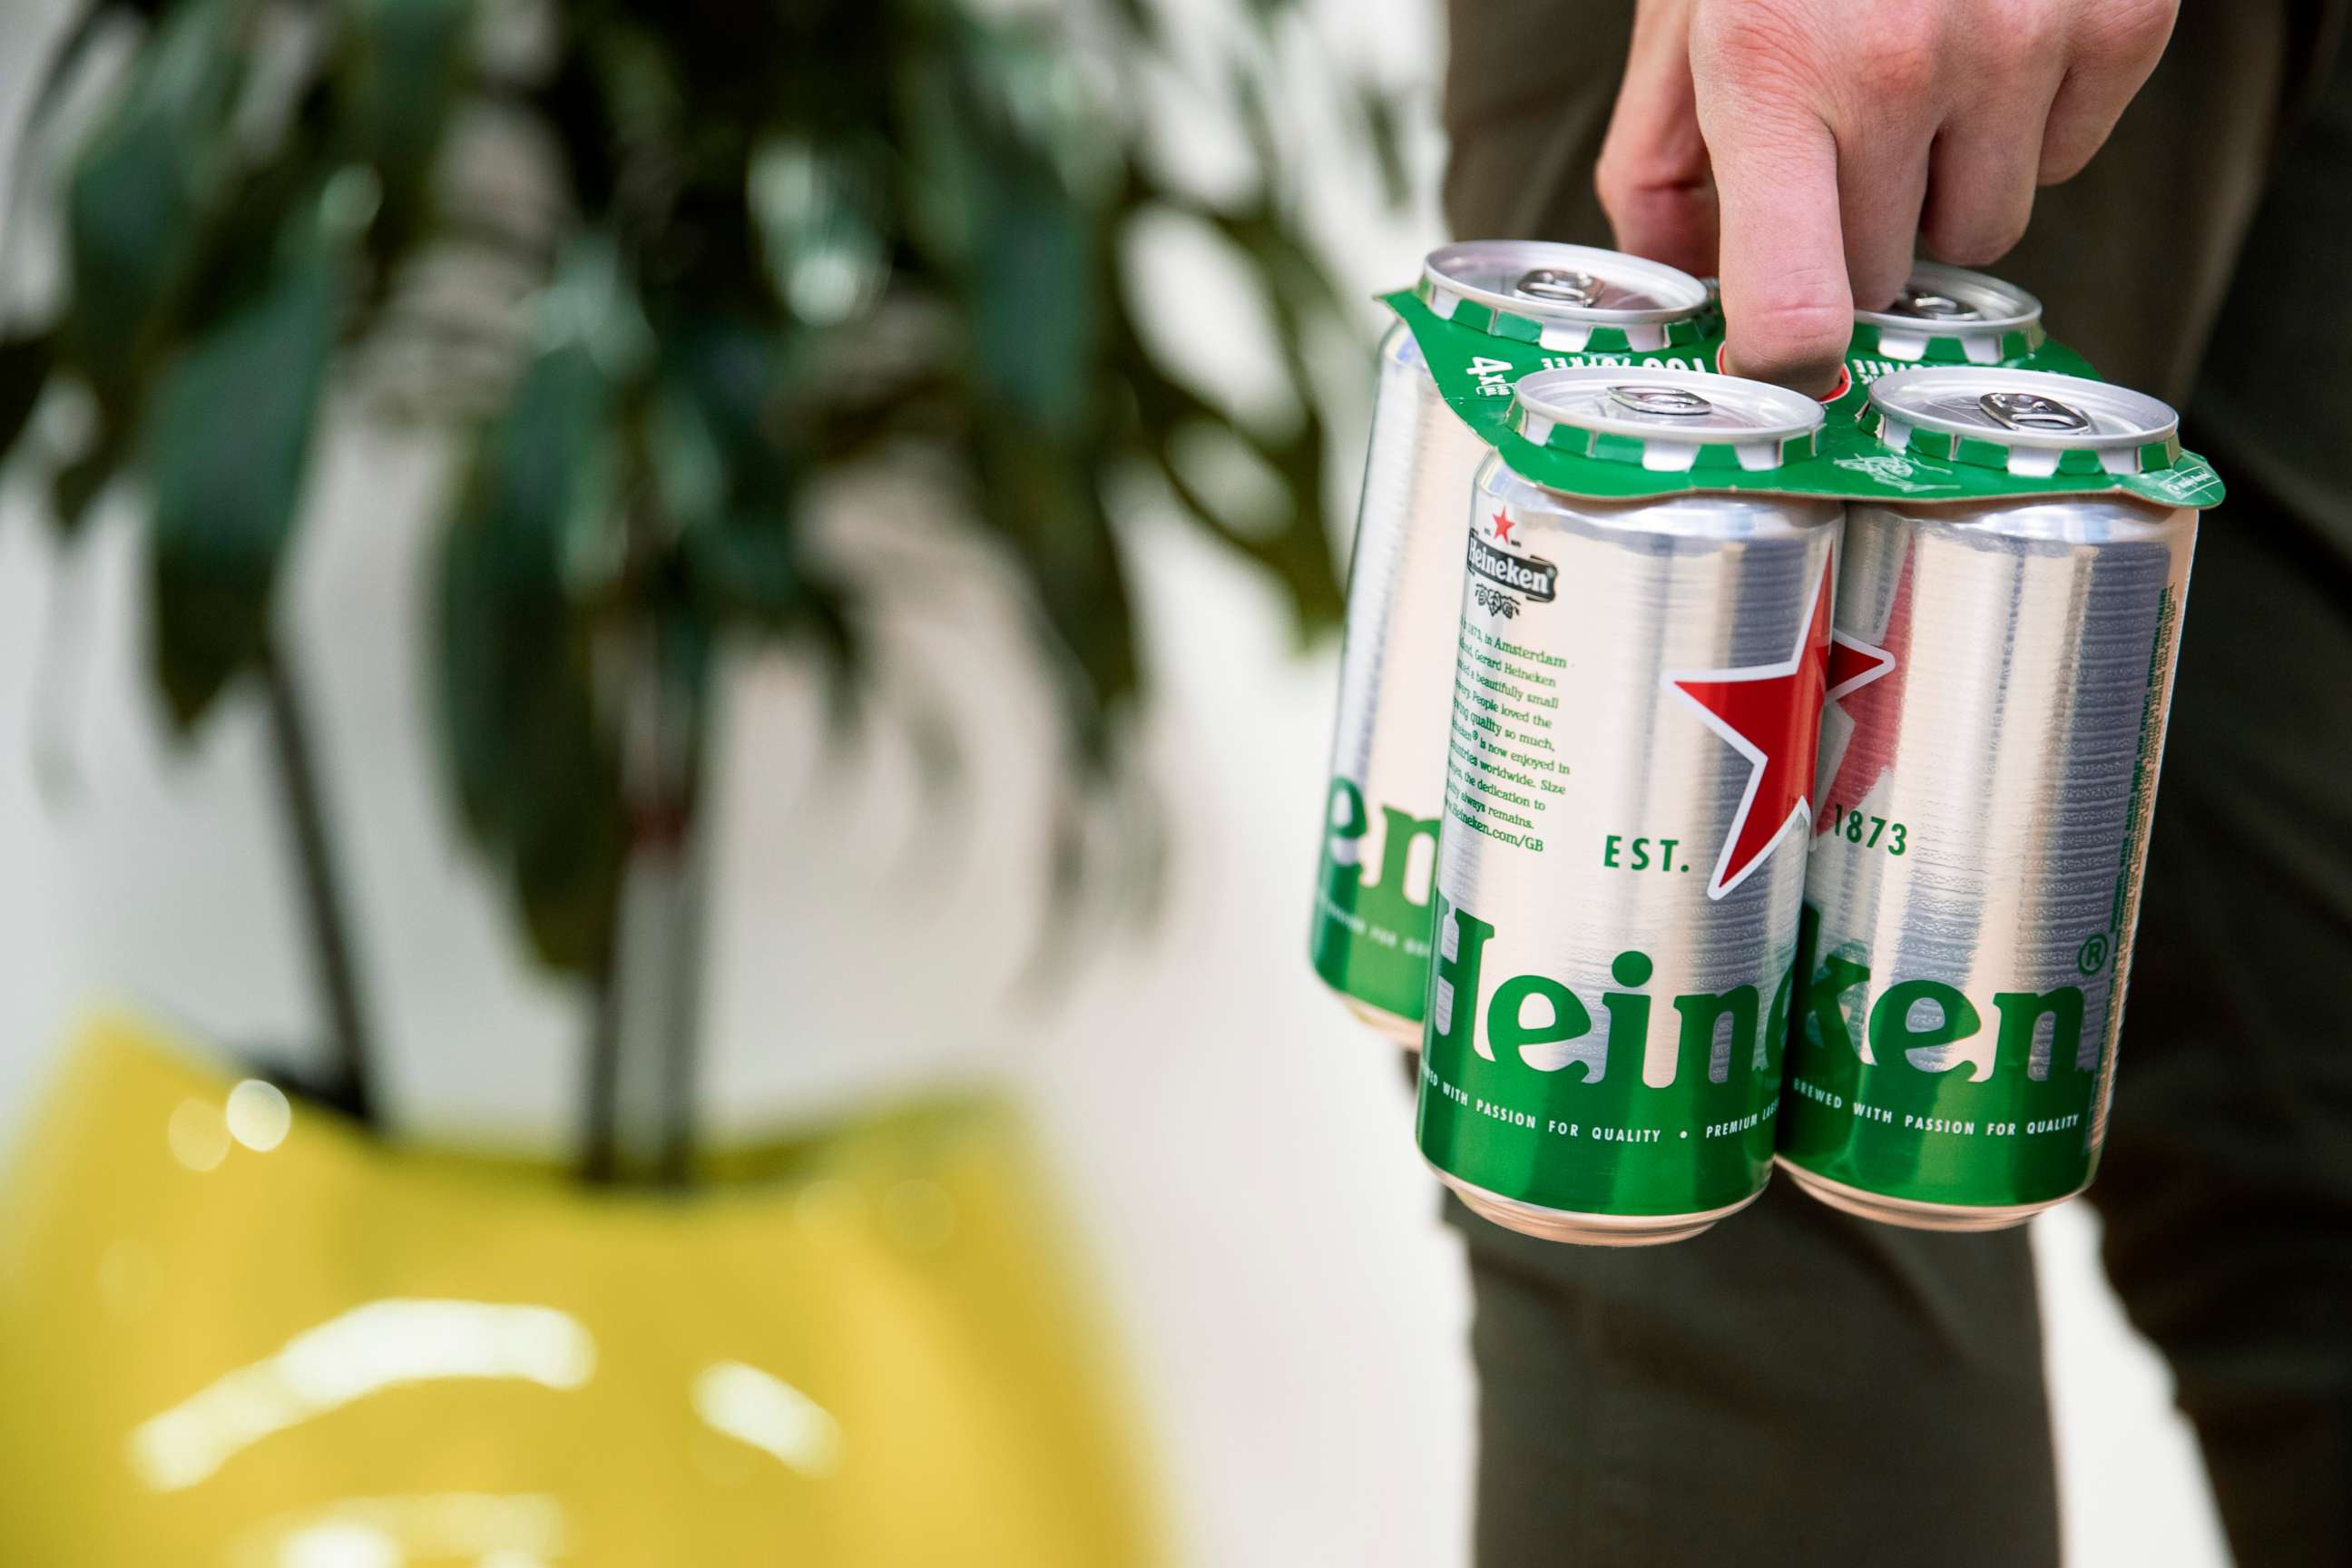 PHOTO: Brewing giant Heineken has become the latest beer firm to replace the plastic "six-pack rings" with an environmentally friendly alternative in a bid to reduce plastic pollution.